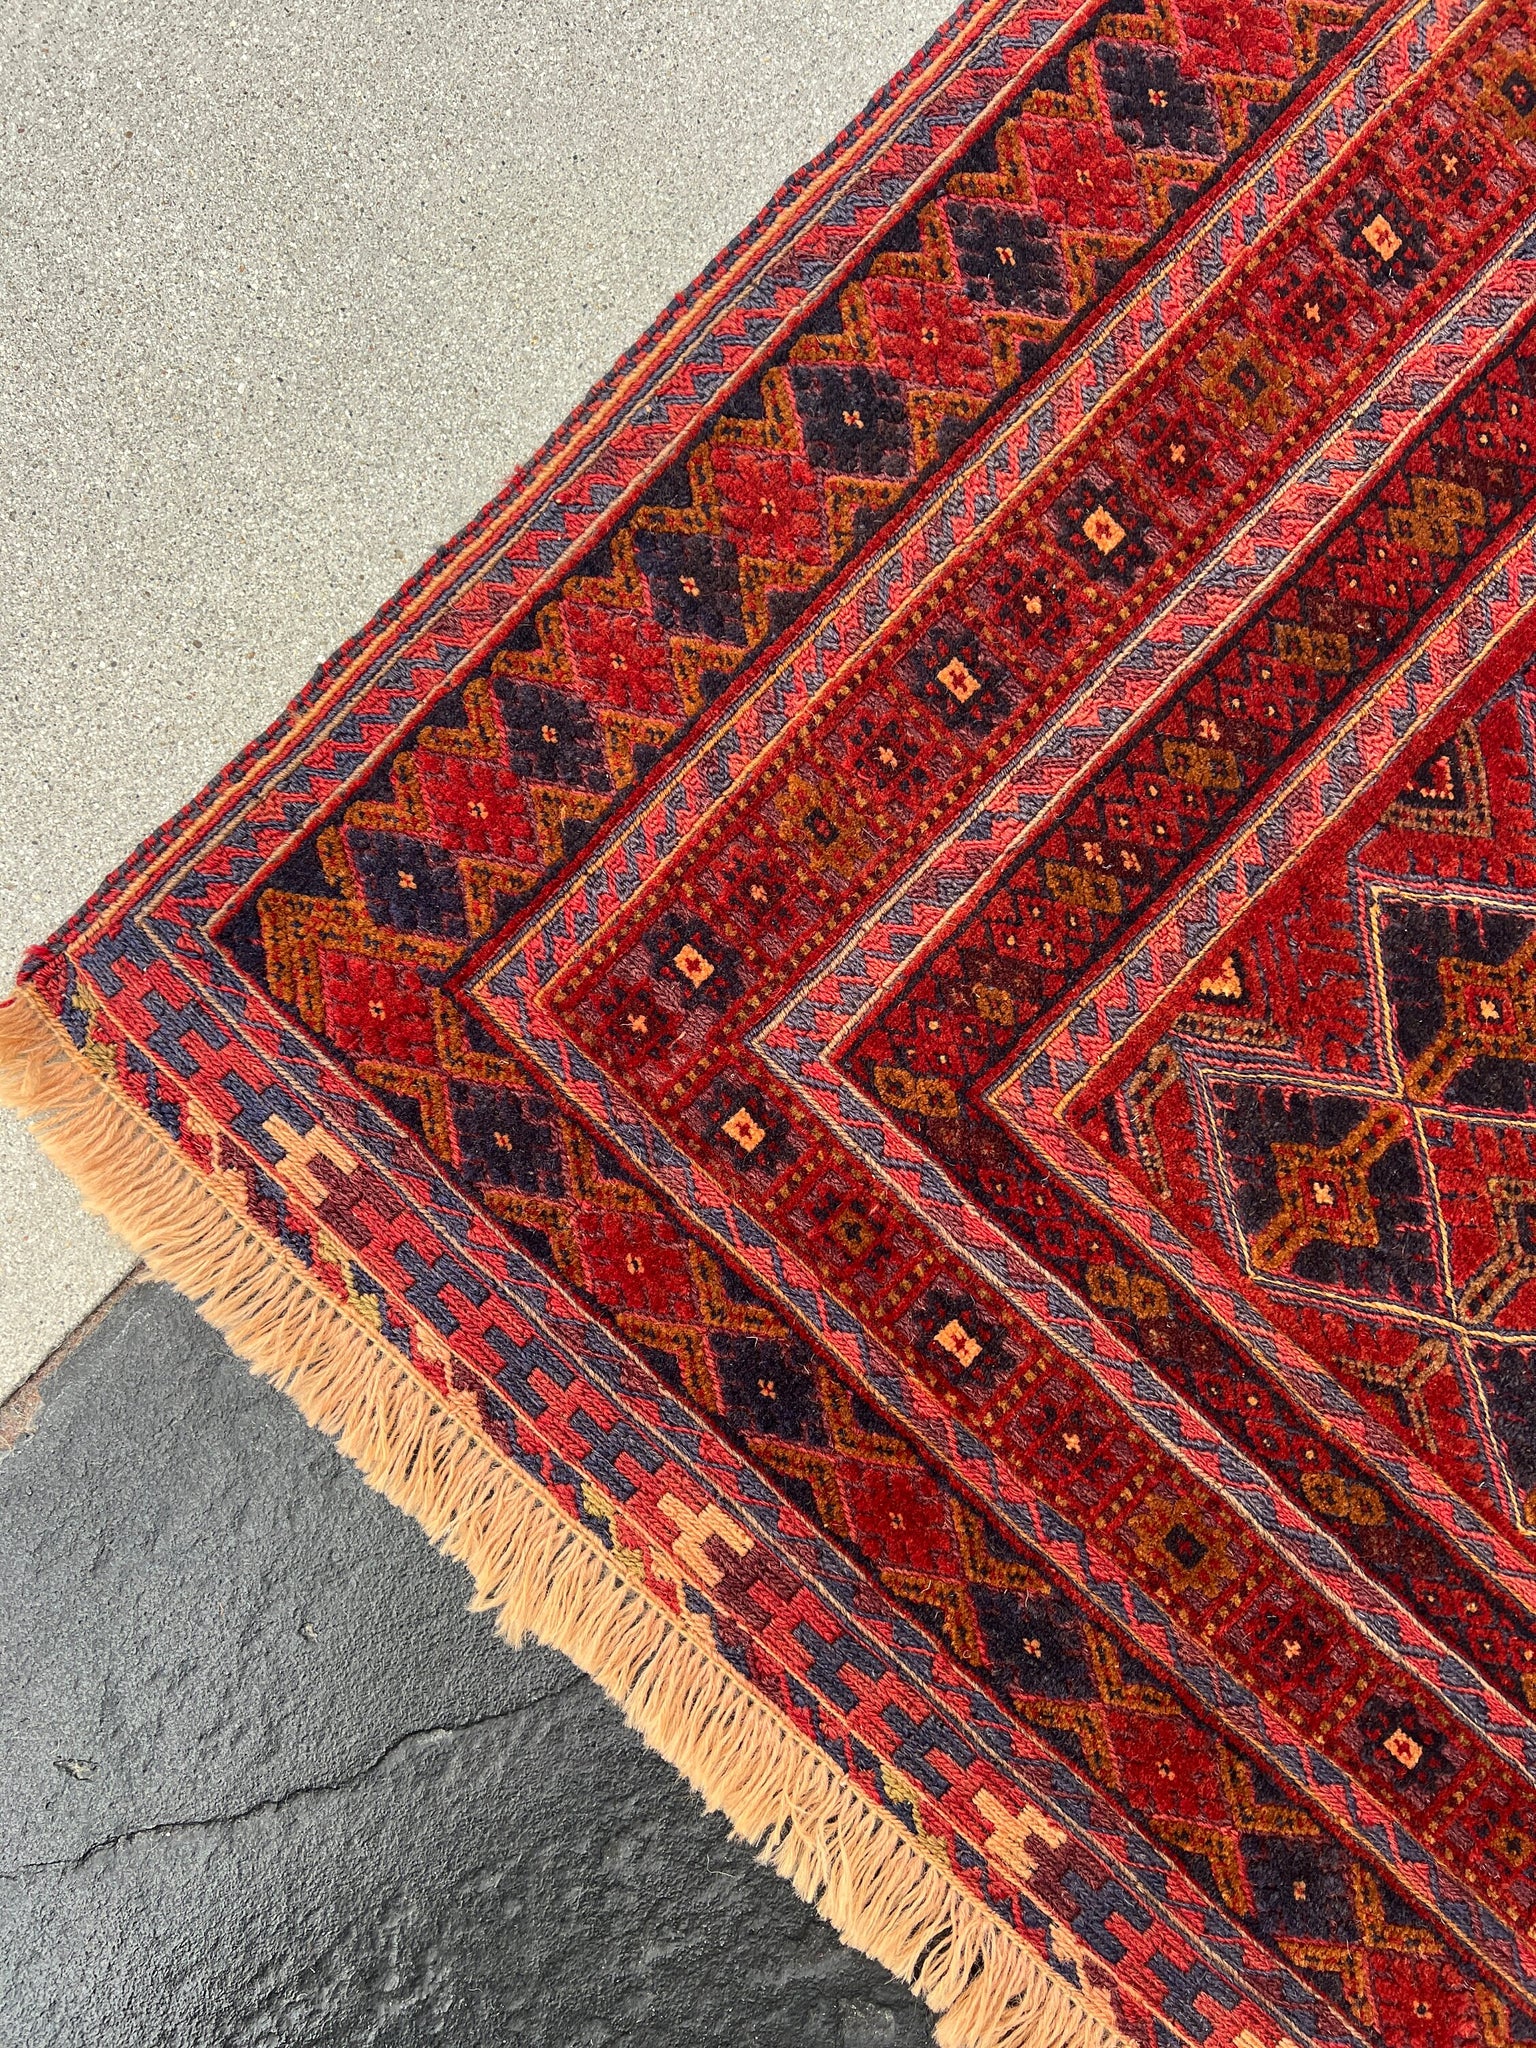 5x7 (150x215) Handmade Vintage Afghan Rug | Blood Red Navy Blue Taupe Chocolate Brown Orange Olive Green | Hand Knotted Bohemian Wool